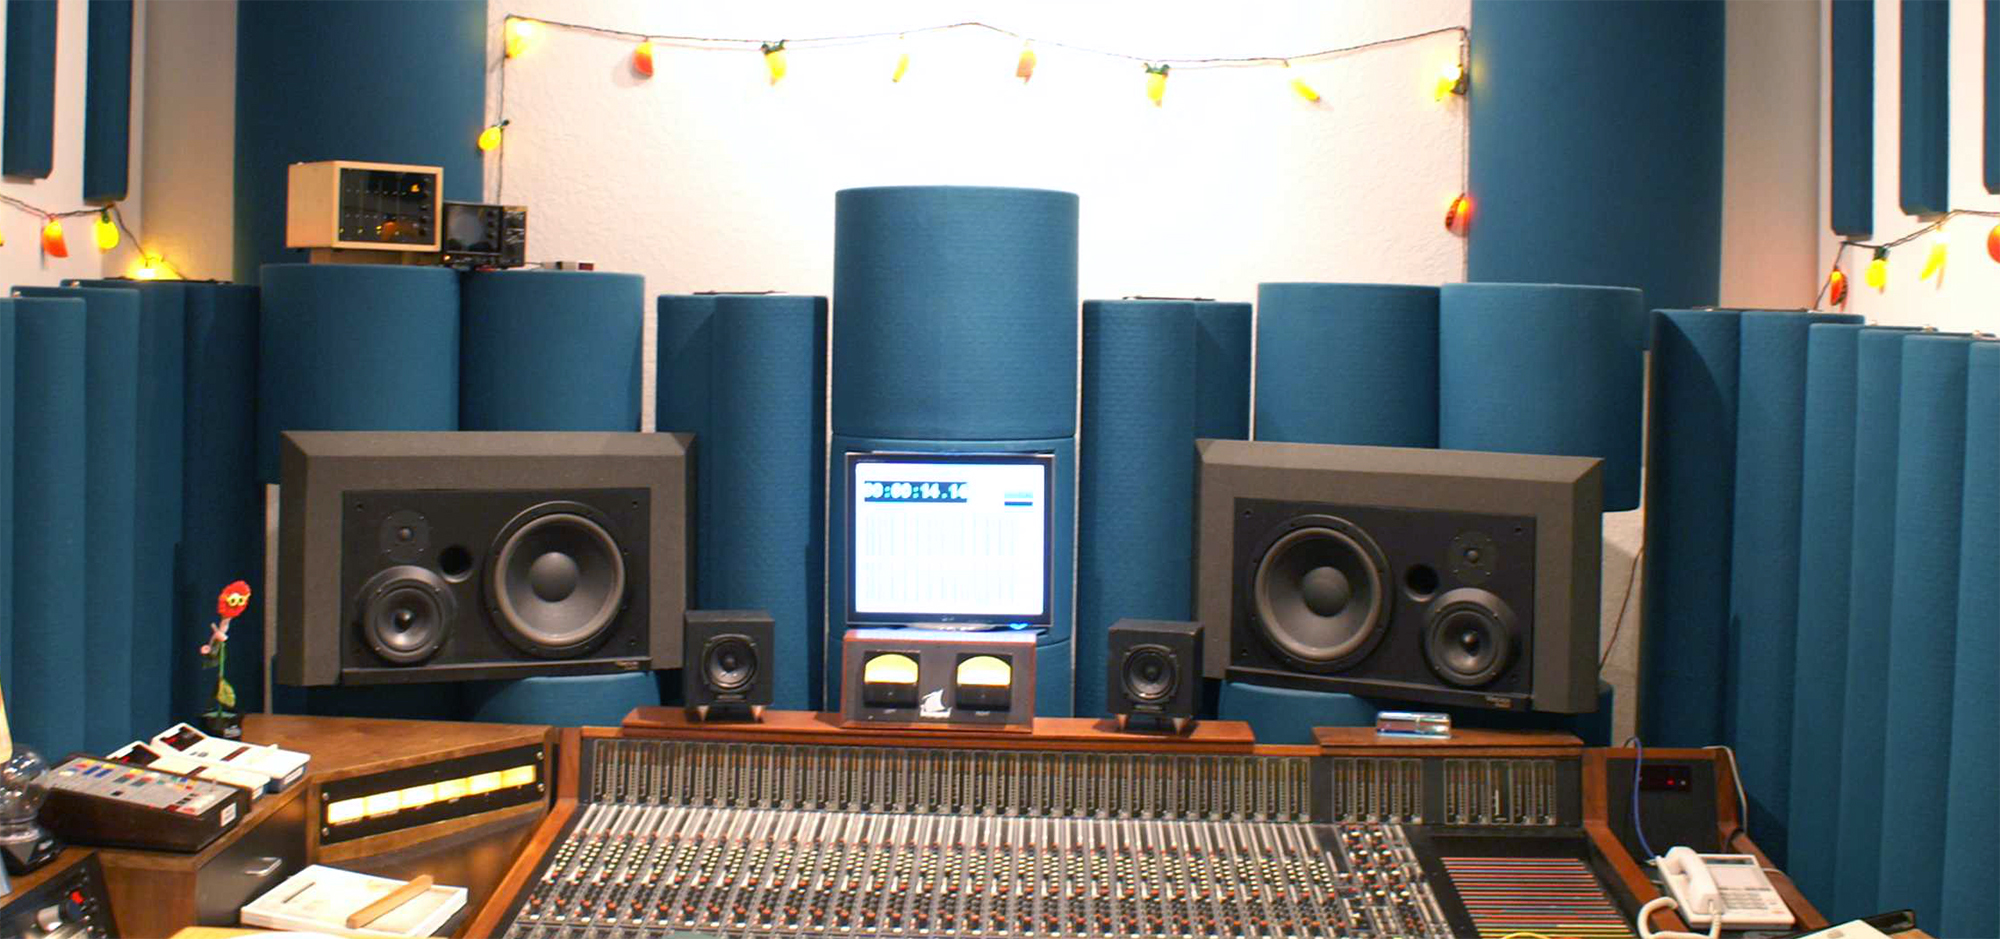 Pro Audio. bruce sweiden's studio and attackwall